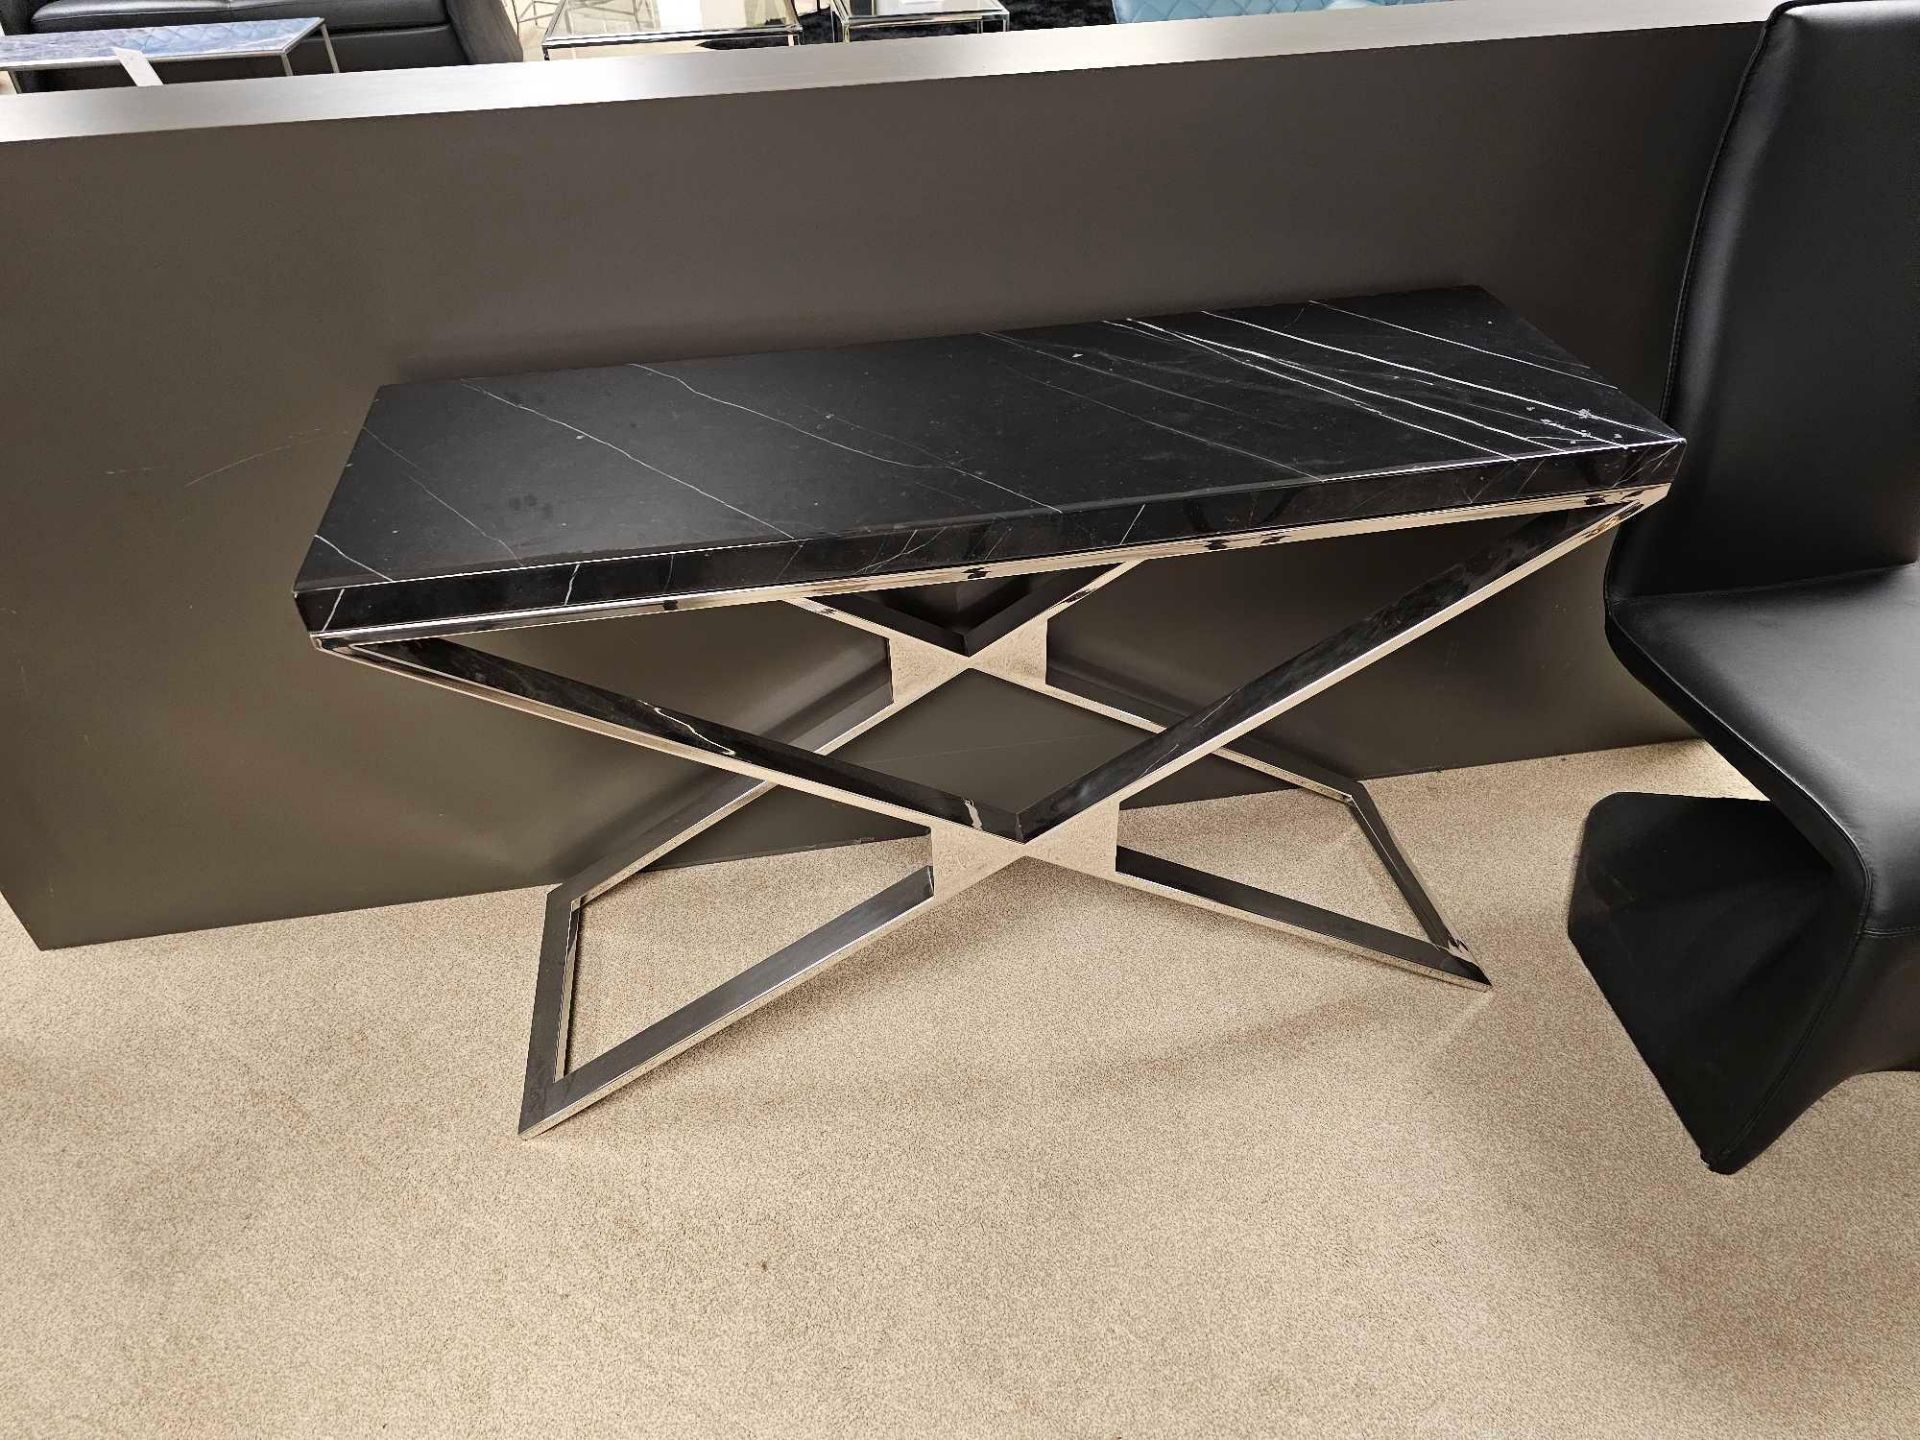 Zephyr Console Table by Kesterport This Console Table has a classic frame design which we have